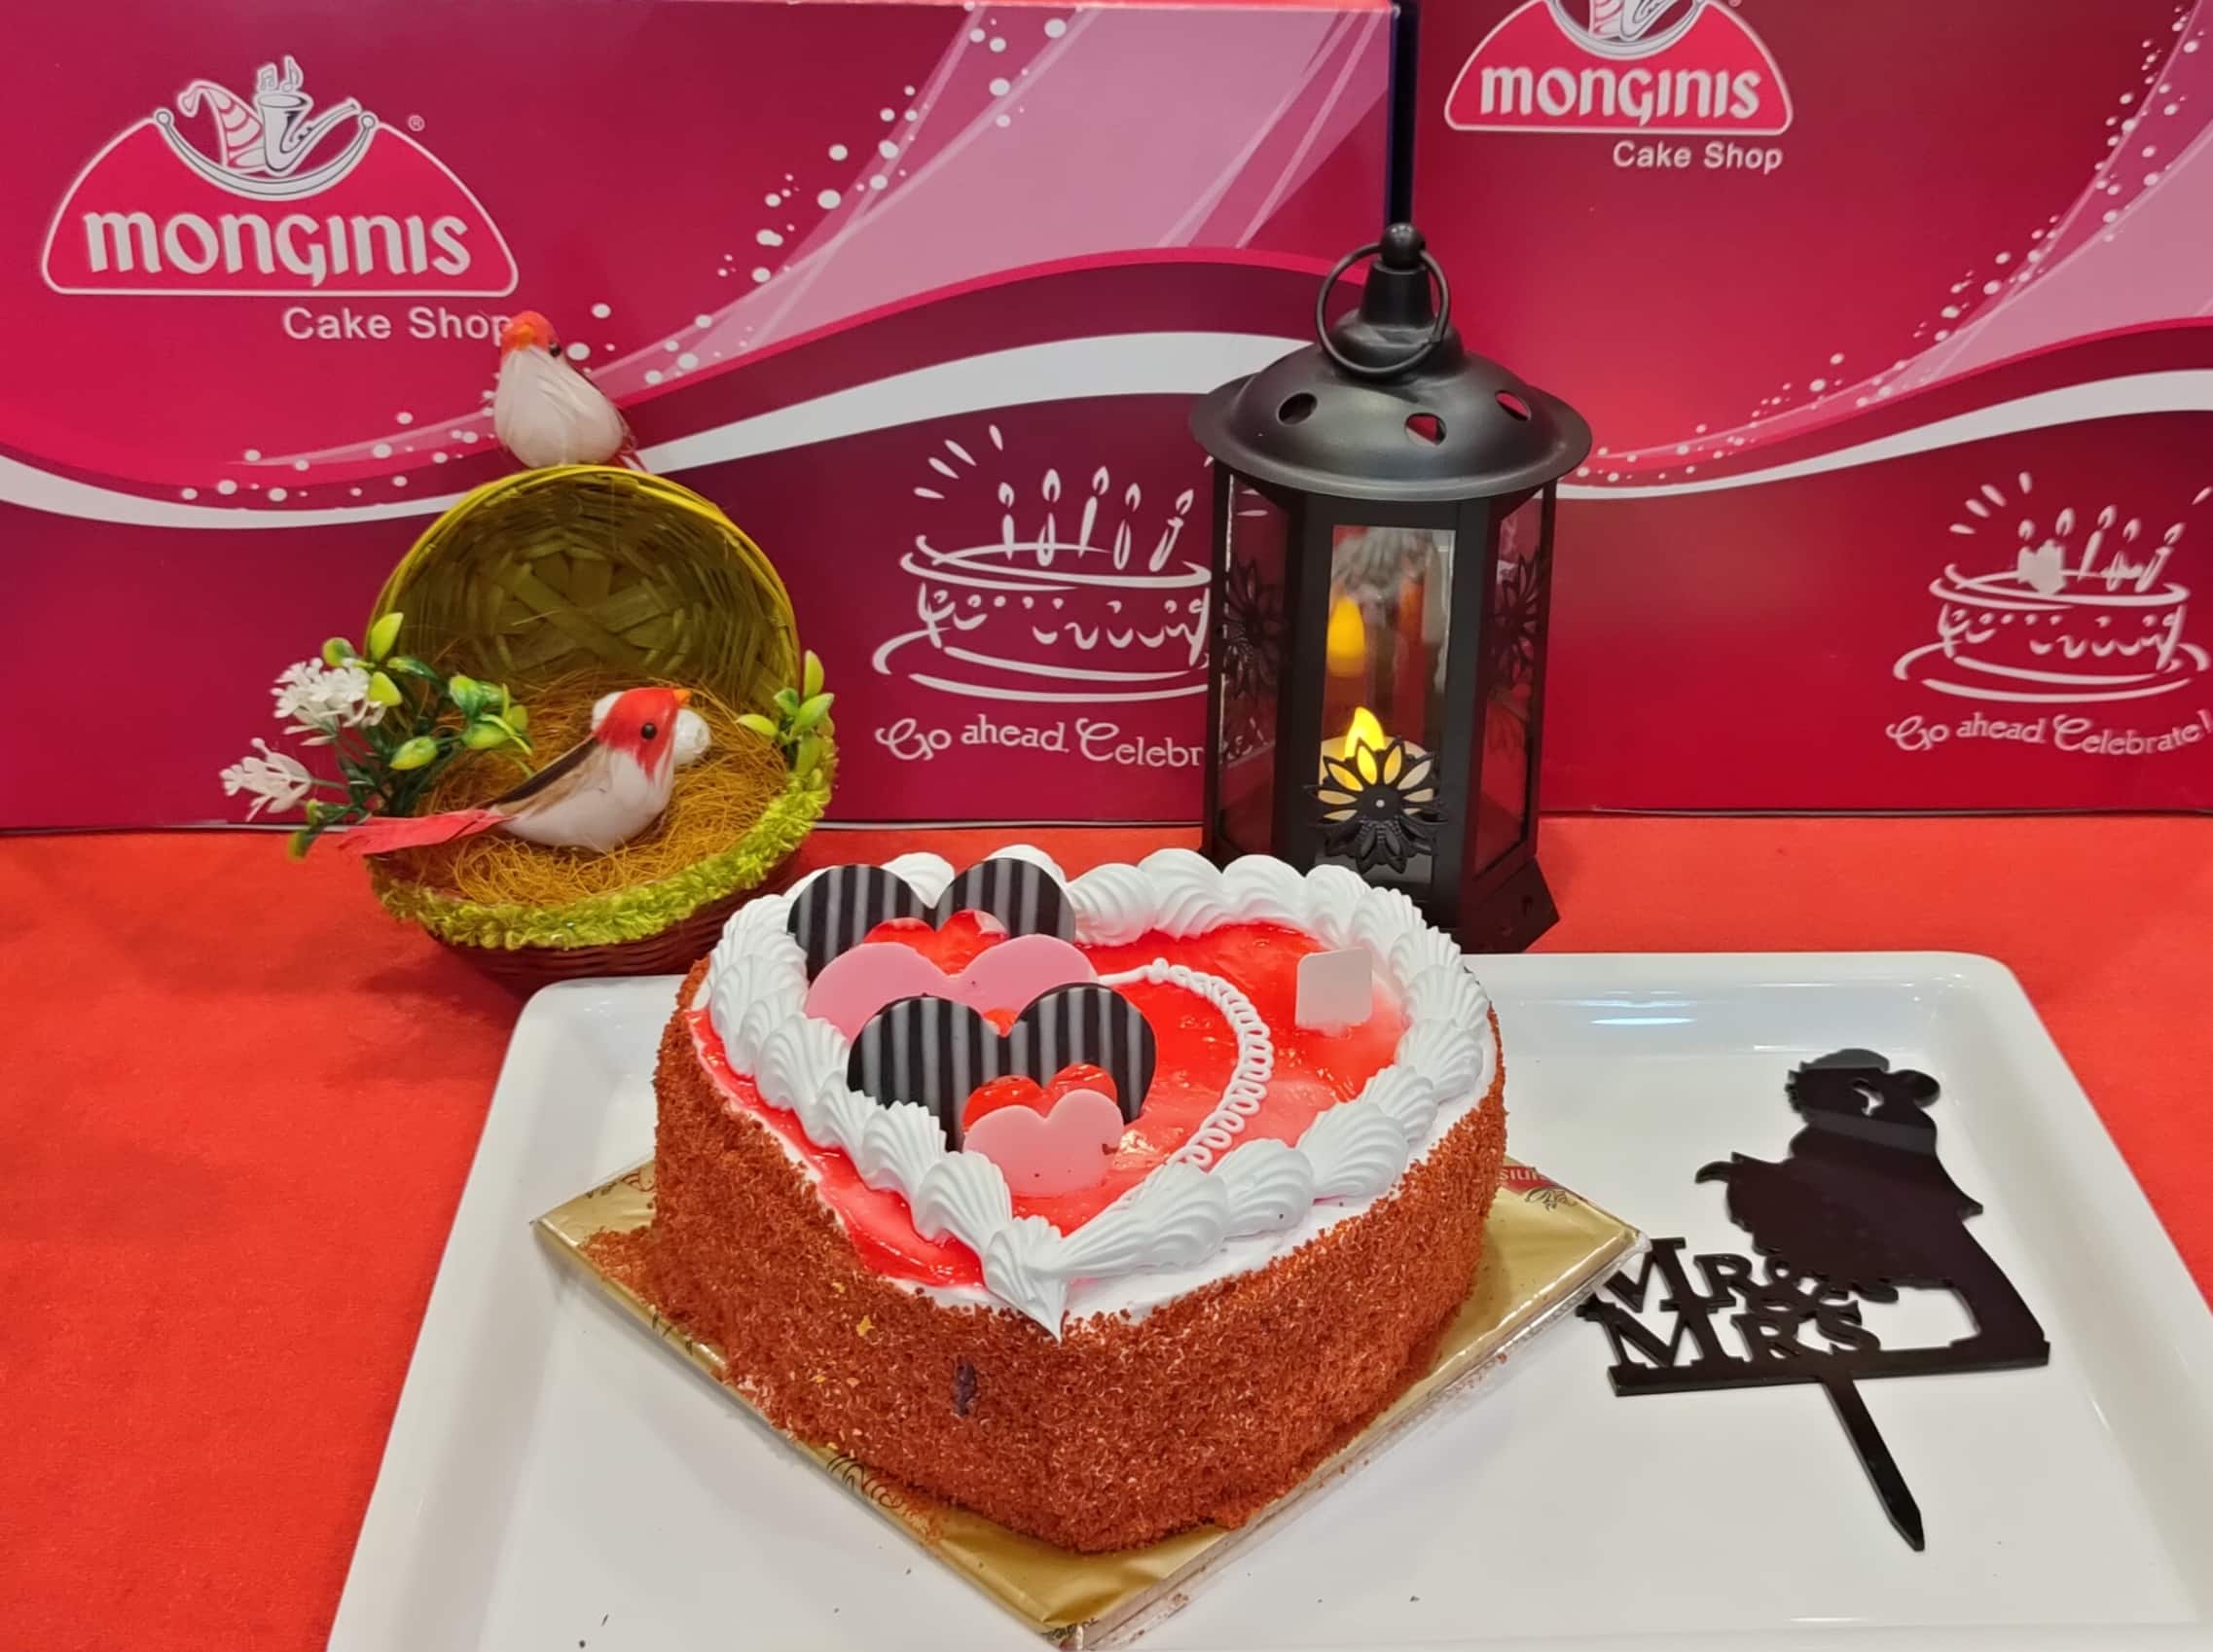 Monginis The Cake Shop in Panch Hatdi,Porbandar - Best Monginis-Cake Shops  in Porbandar - Justdial